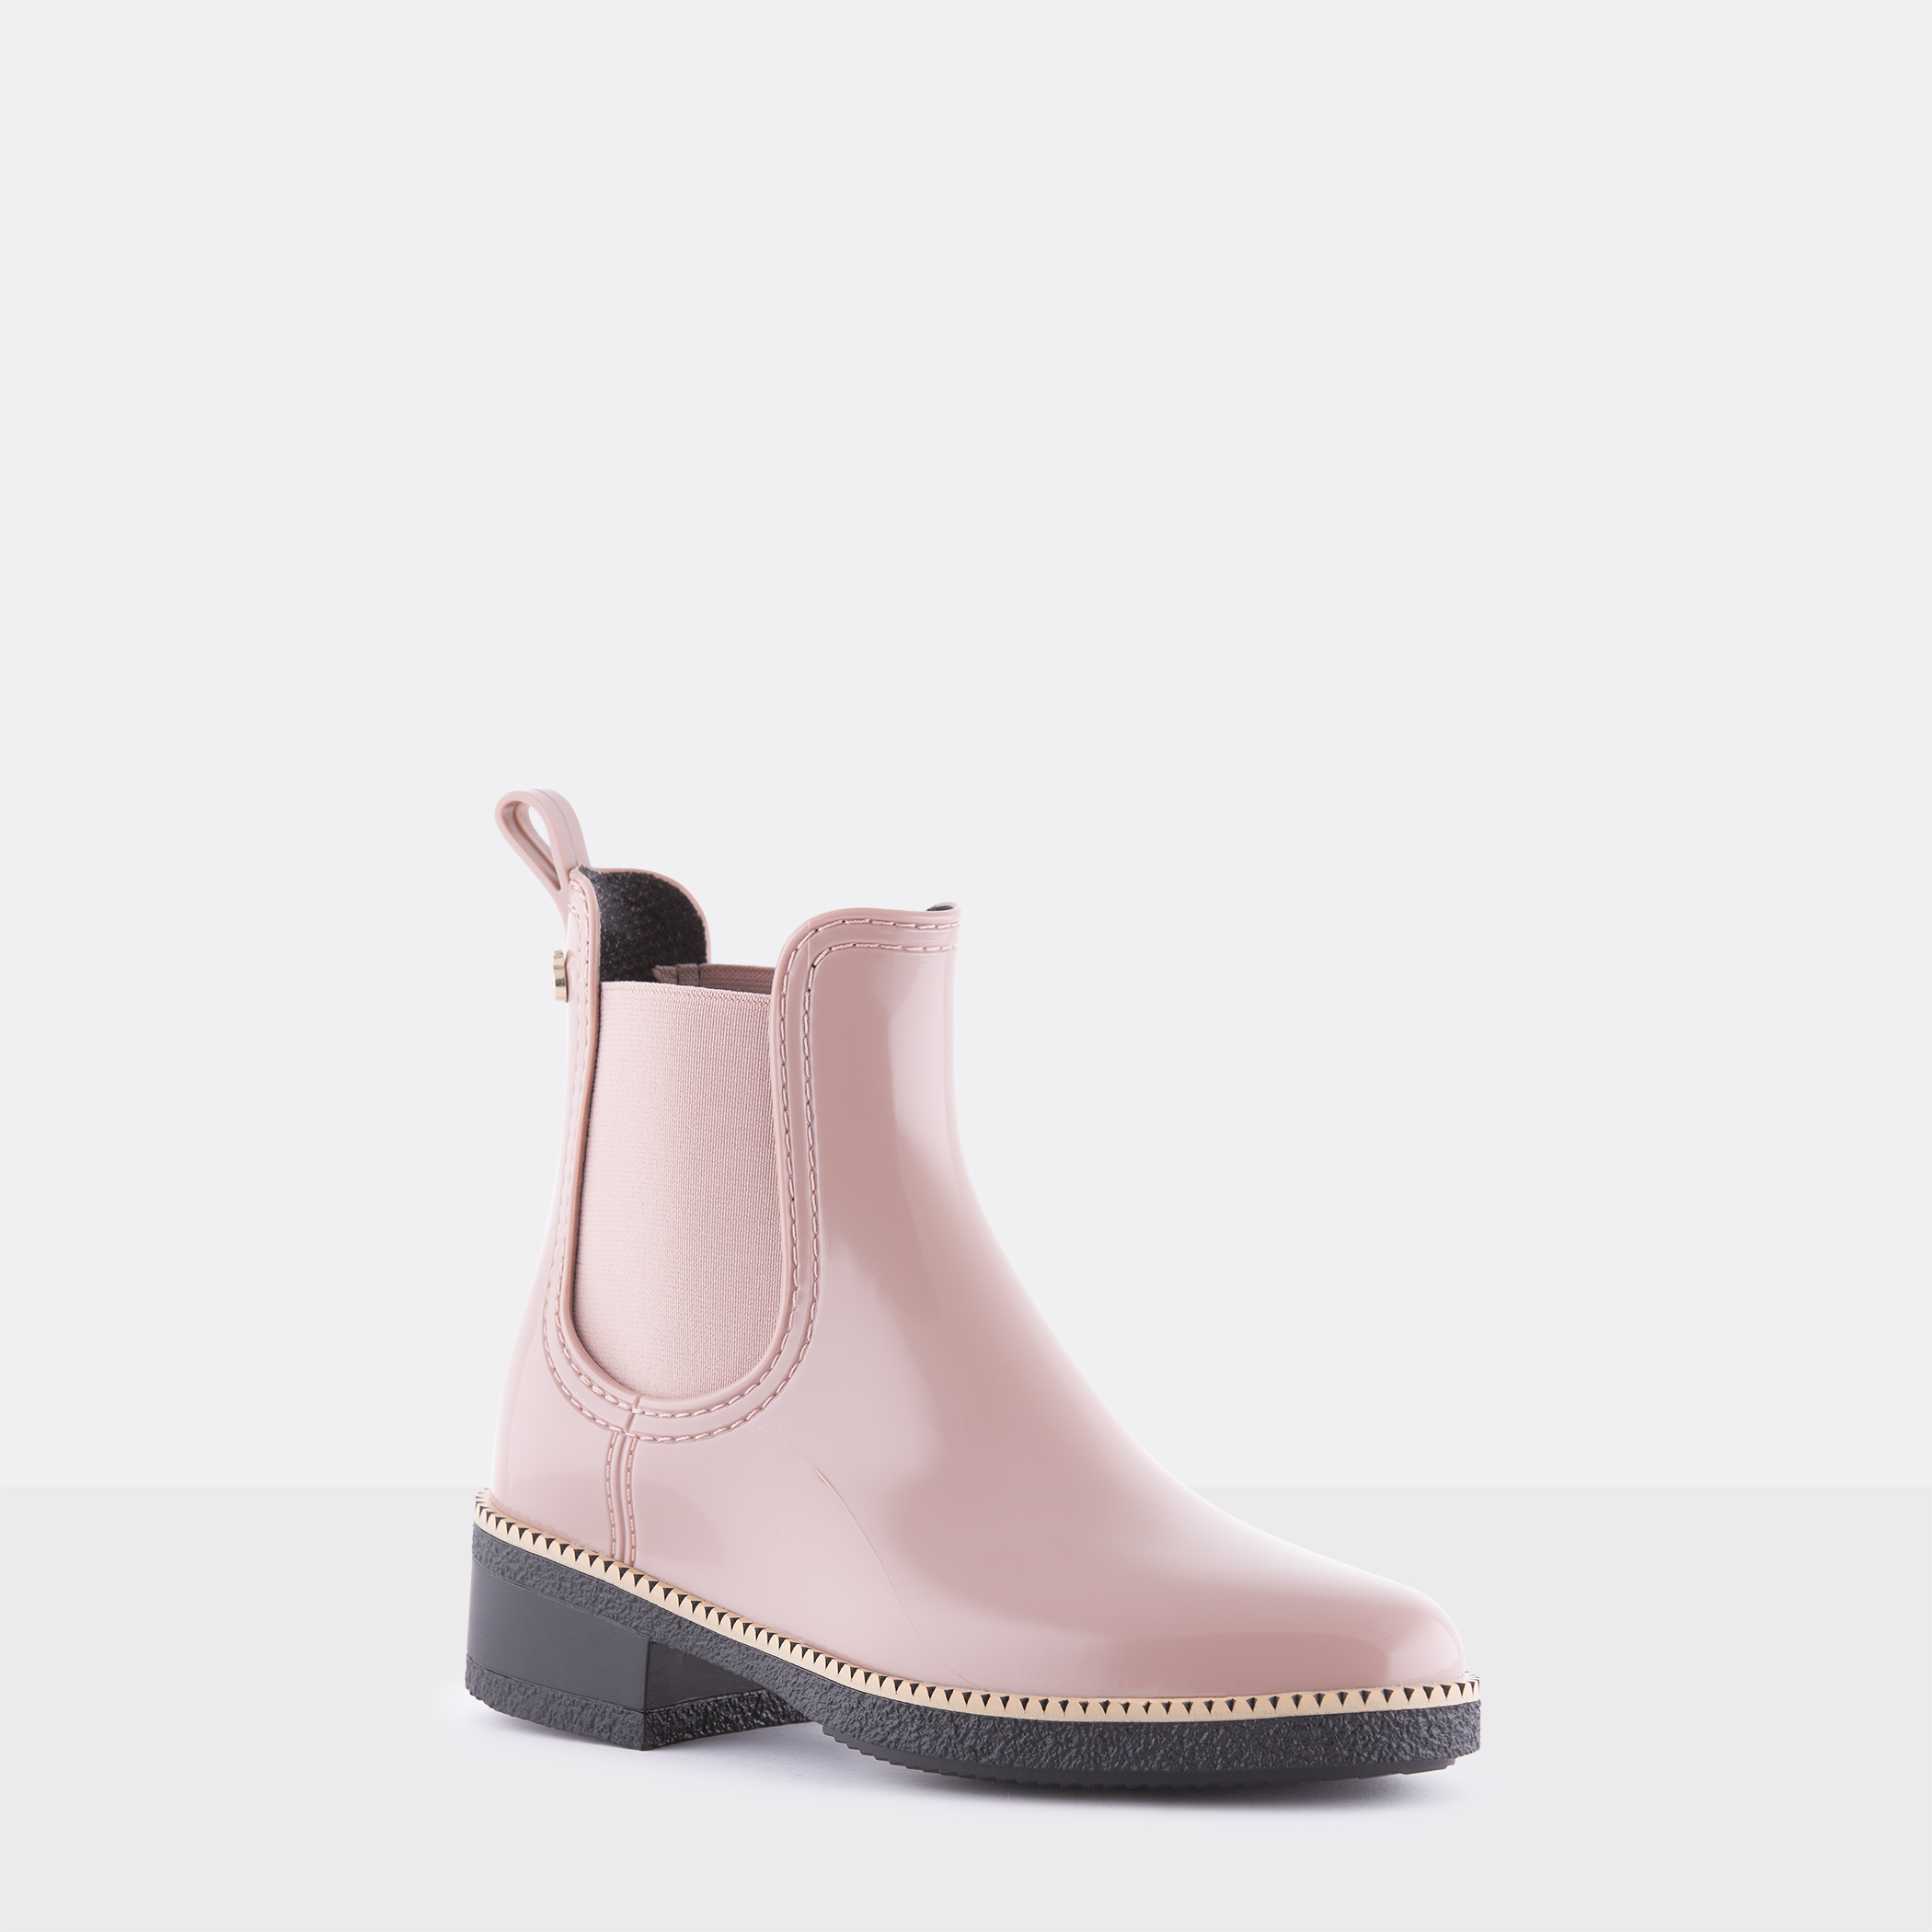 Lemon Jelly Vegan Pink Ankle Boots with Low Heel AVA 19 - 10018745